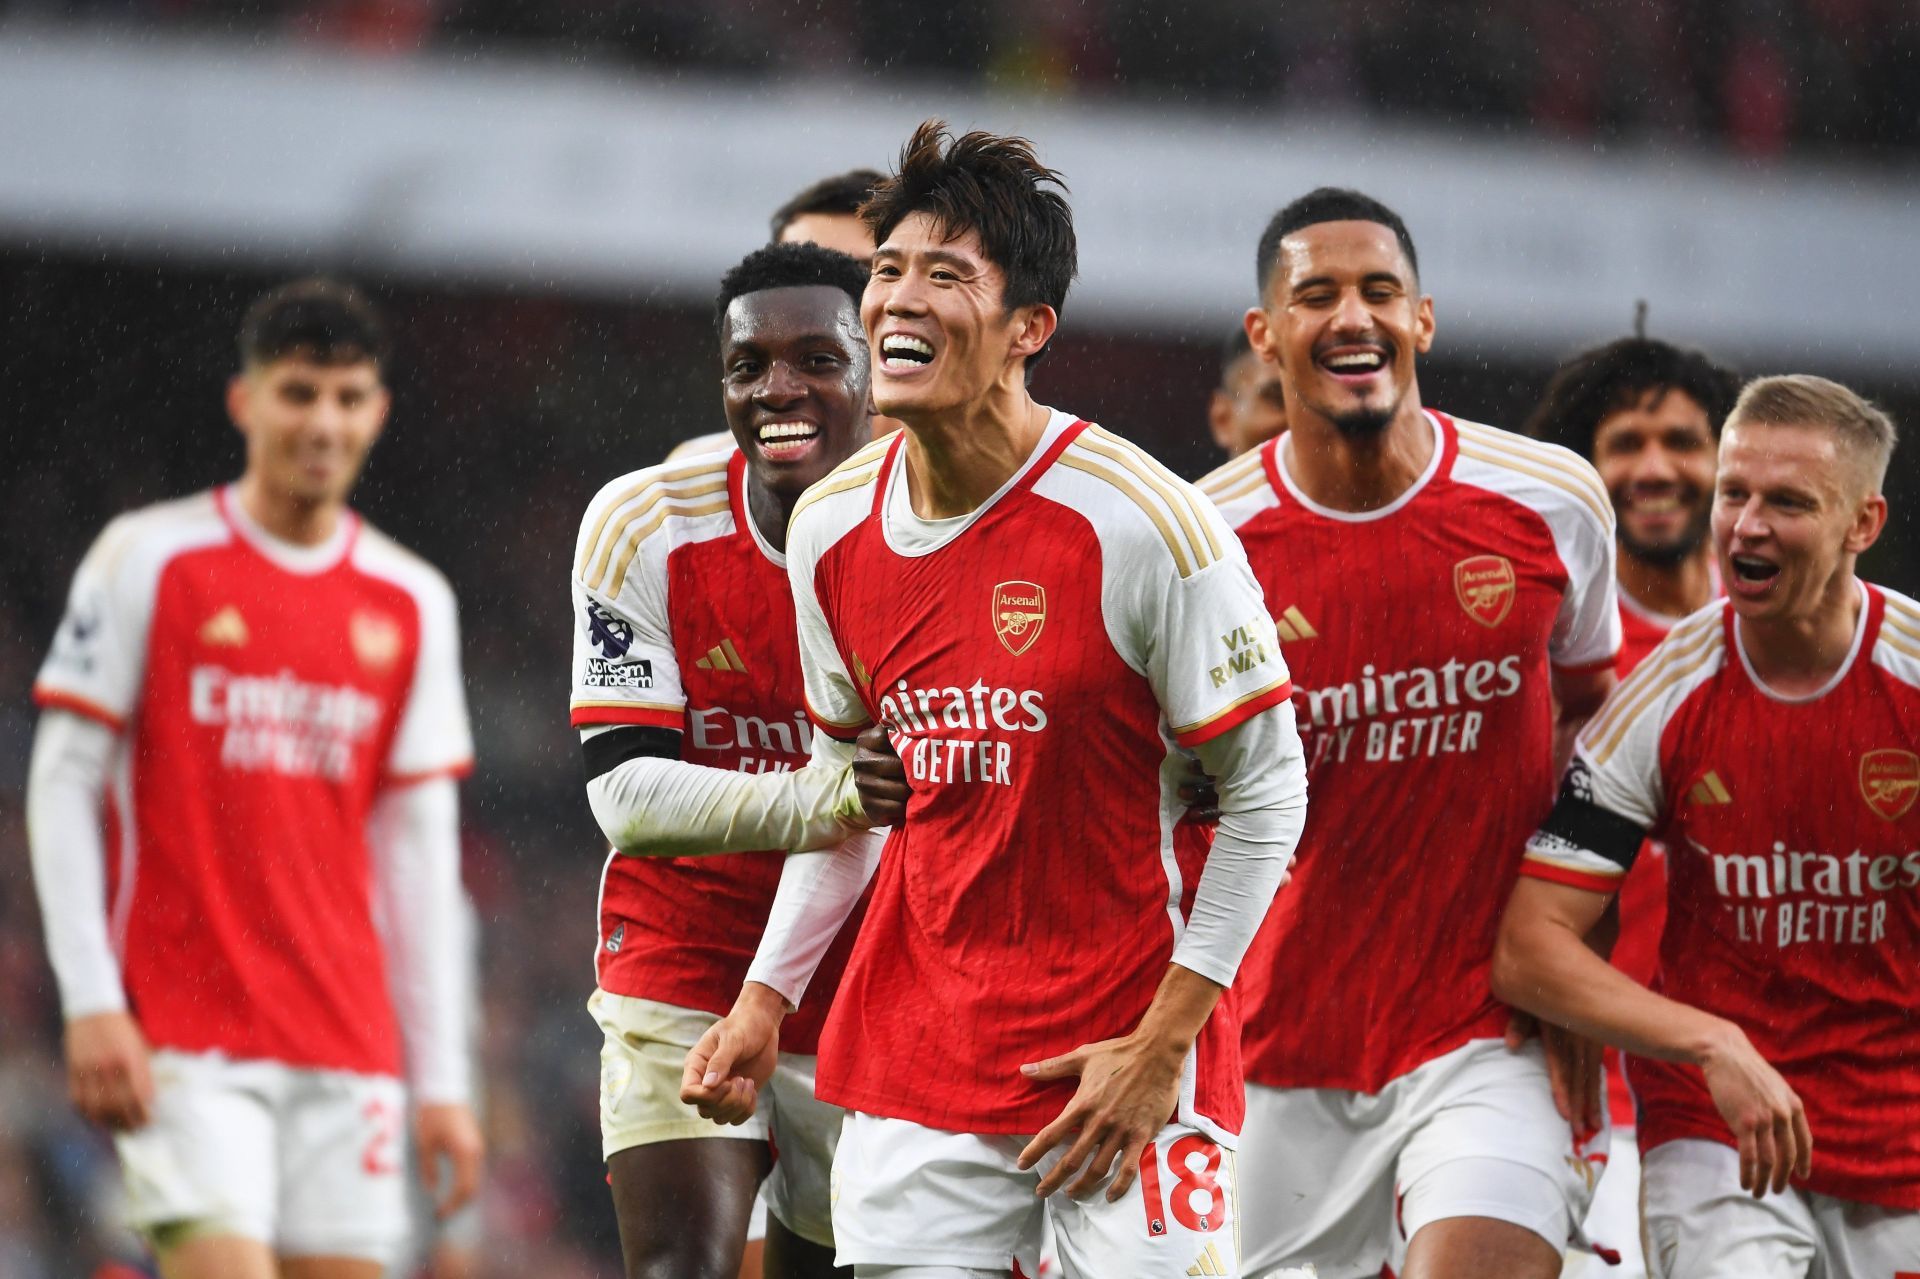 Arsenal put Sheffield United to the sword with a clinical performance at the Emirates